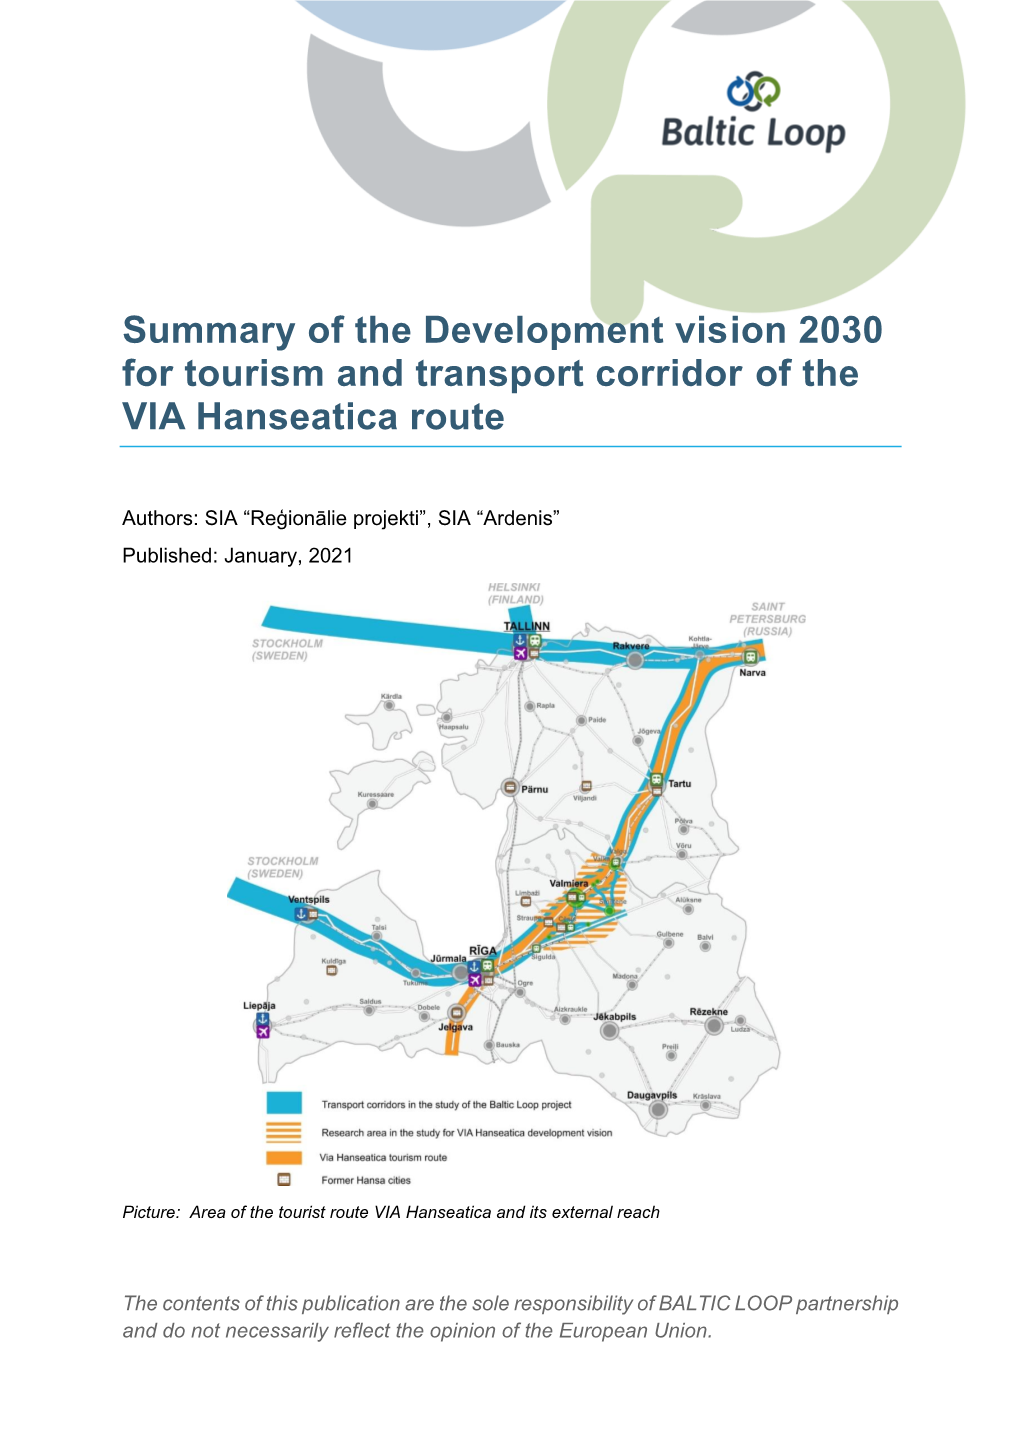 Summary of the Development Vision 2030 for Tourism and Transport Corridor of the VIA Hanseatica Route